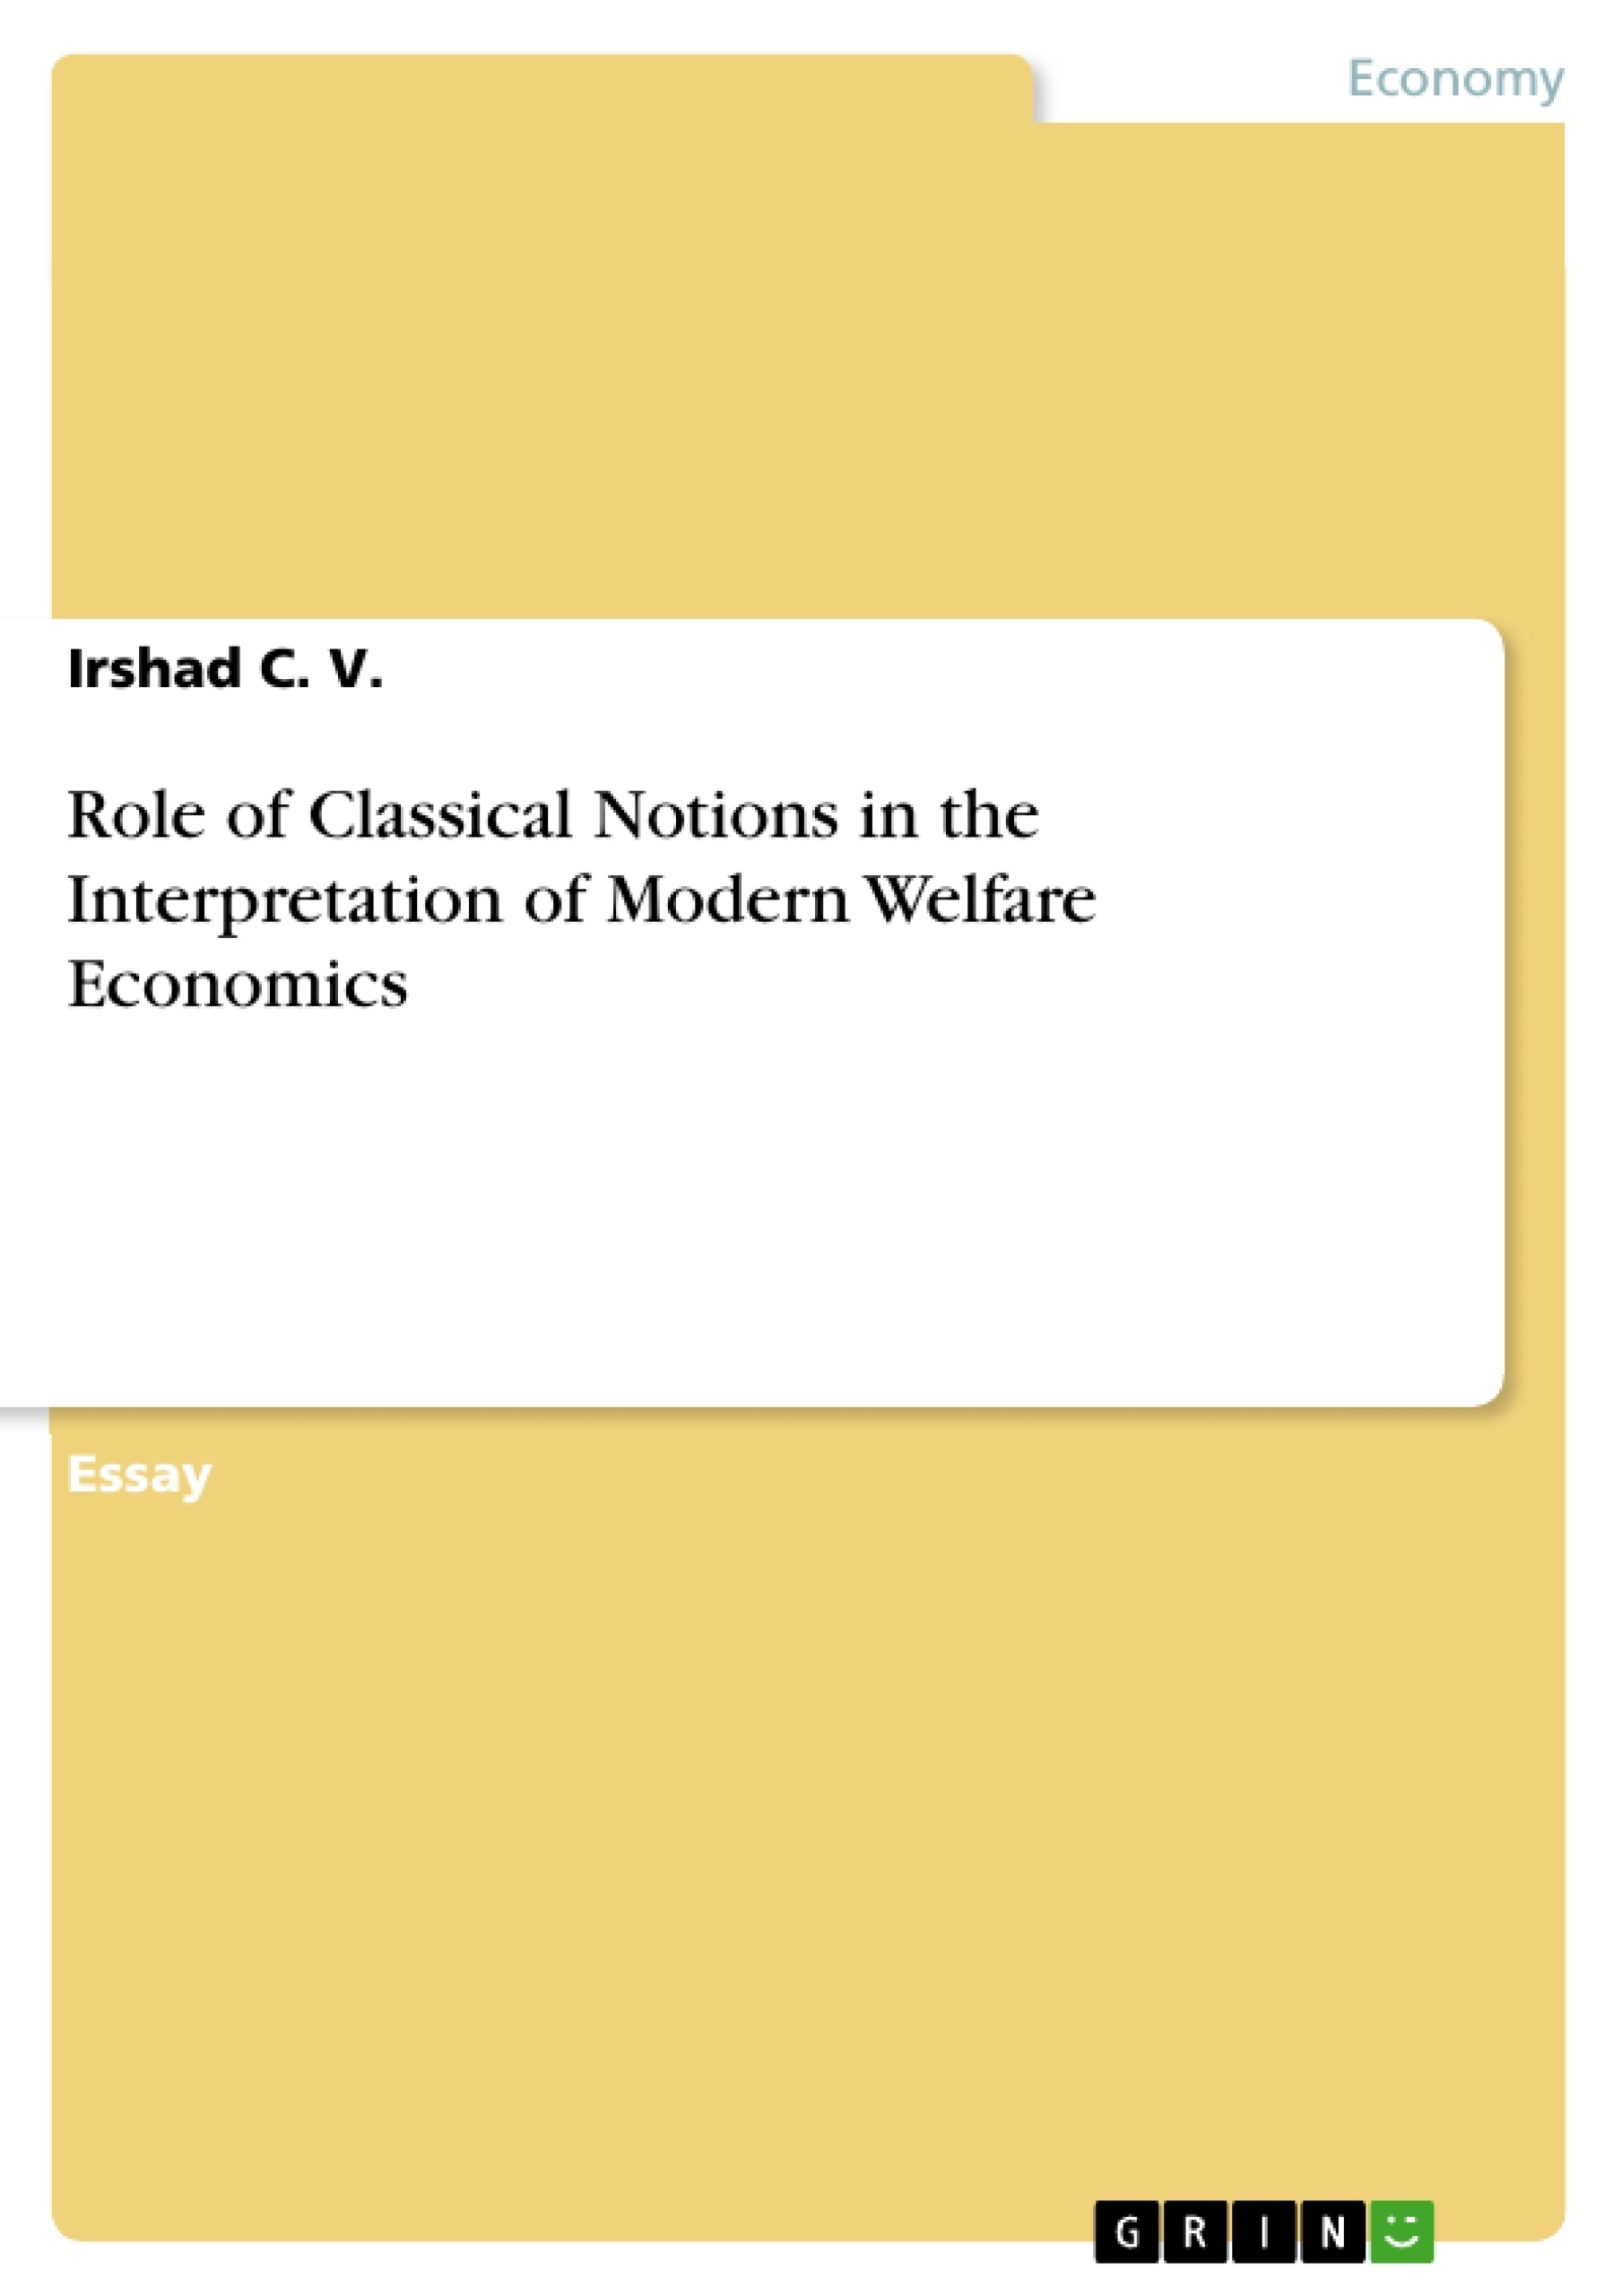 Título: Role of Classical Notions in the Interpretation of Modern Welfare Economics